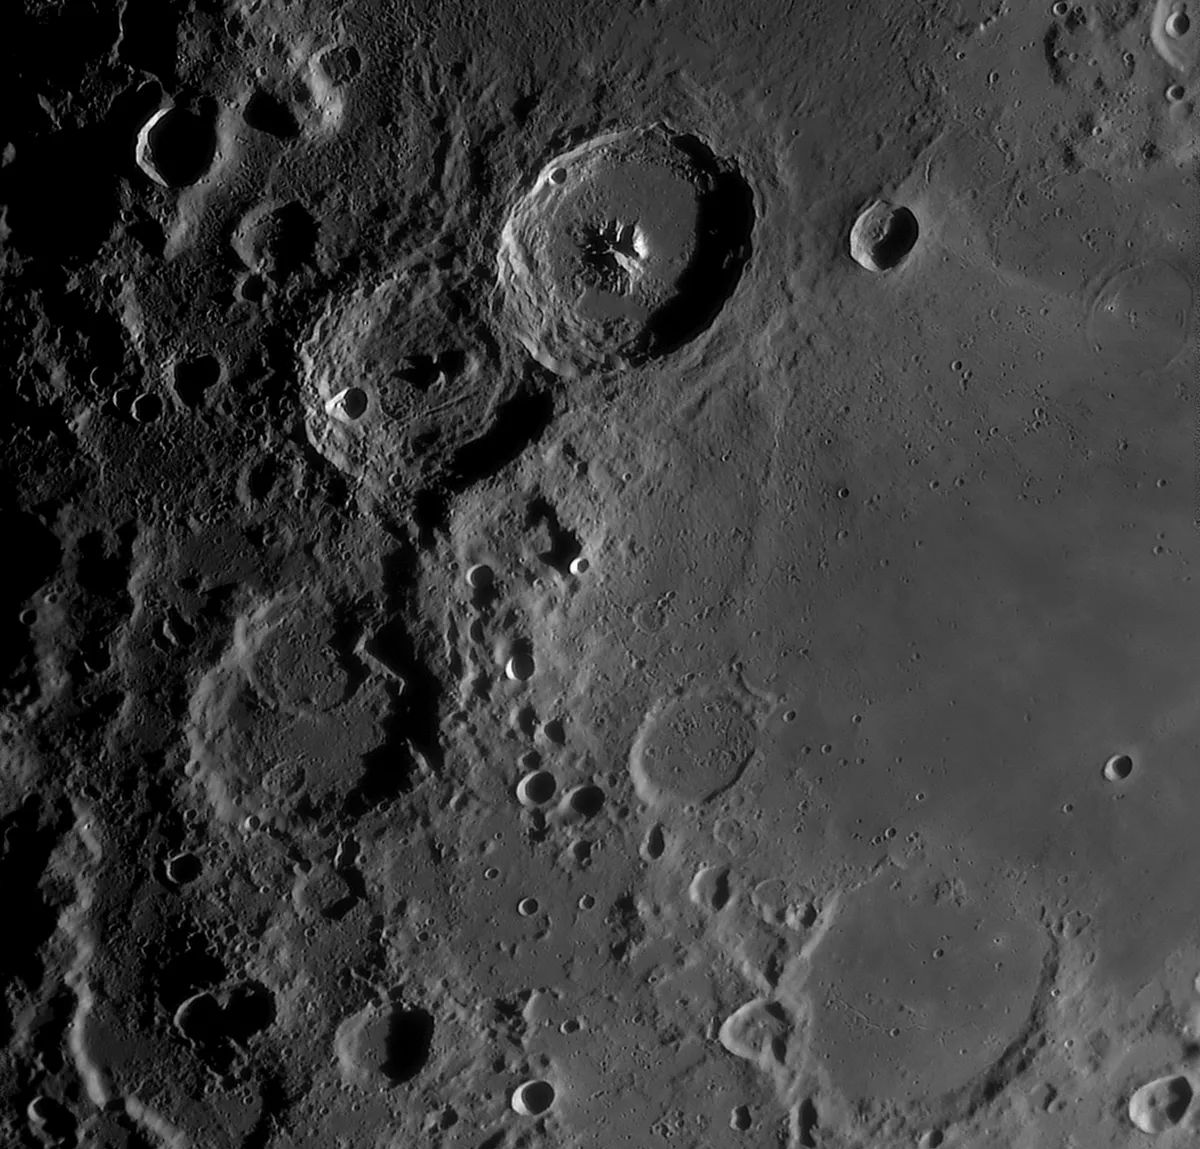 Complex regions such as the area around the crater Theophilus make excellent imaging targets. Credit: Pete Lawrence